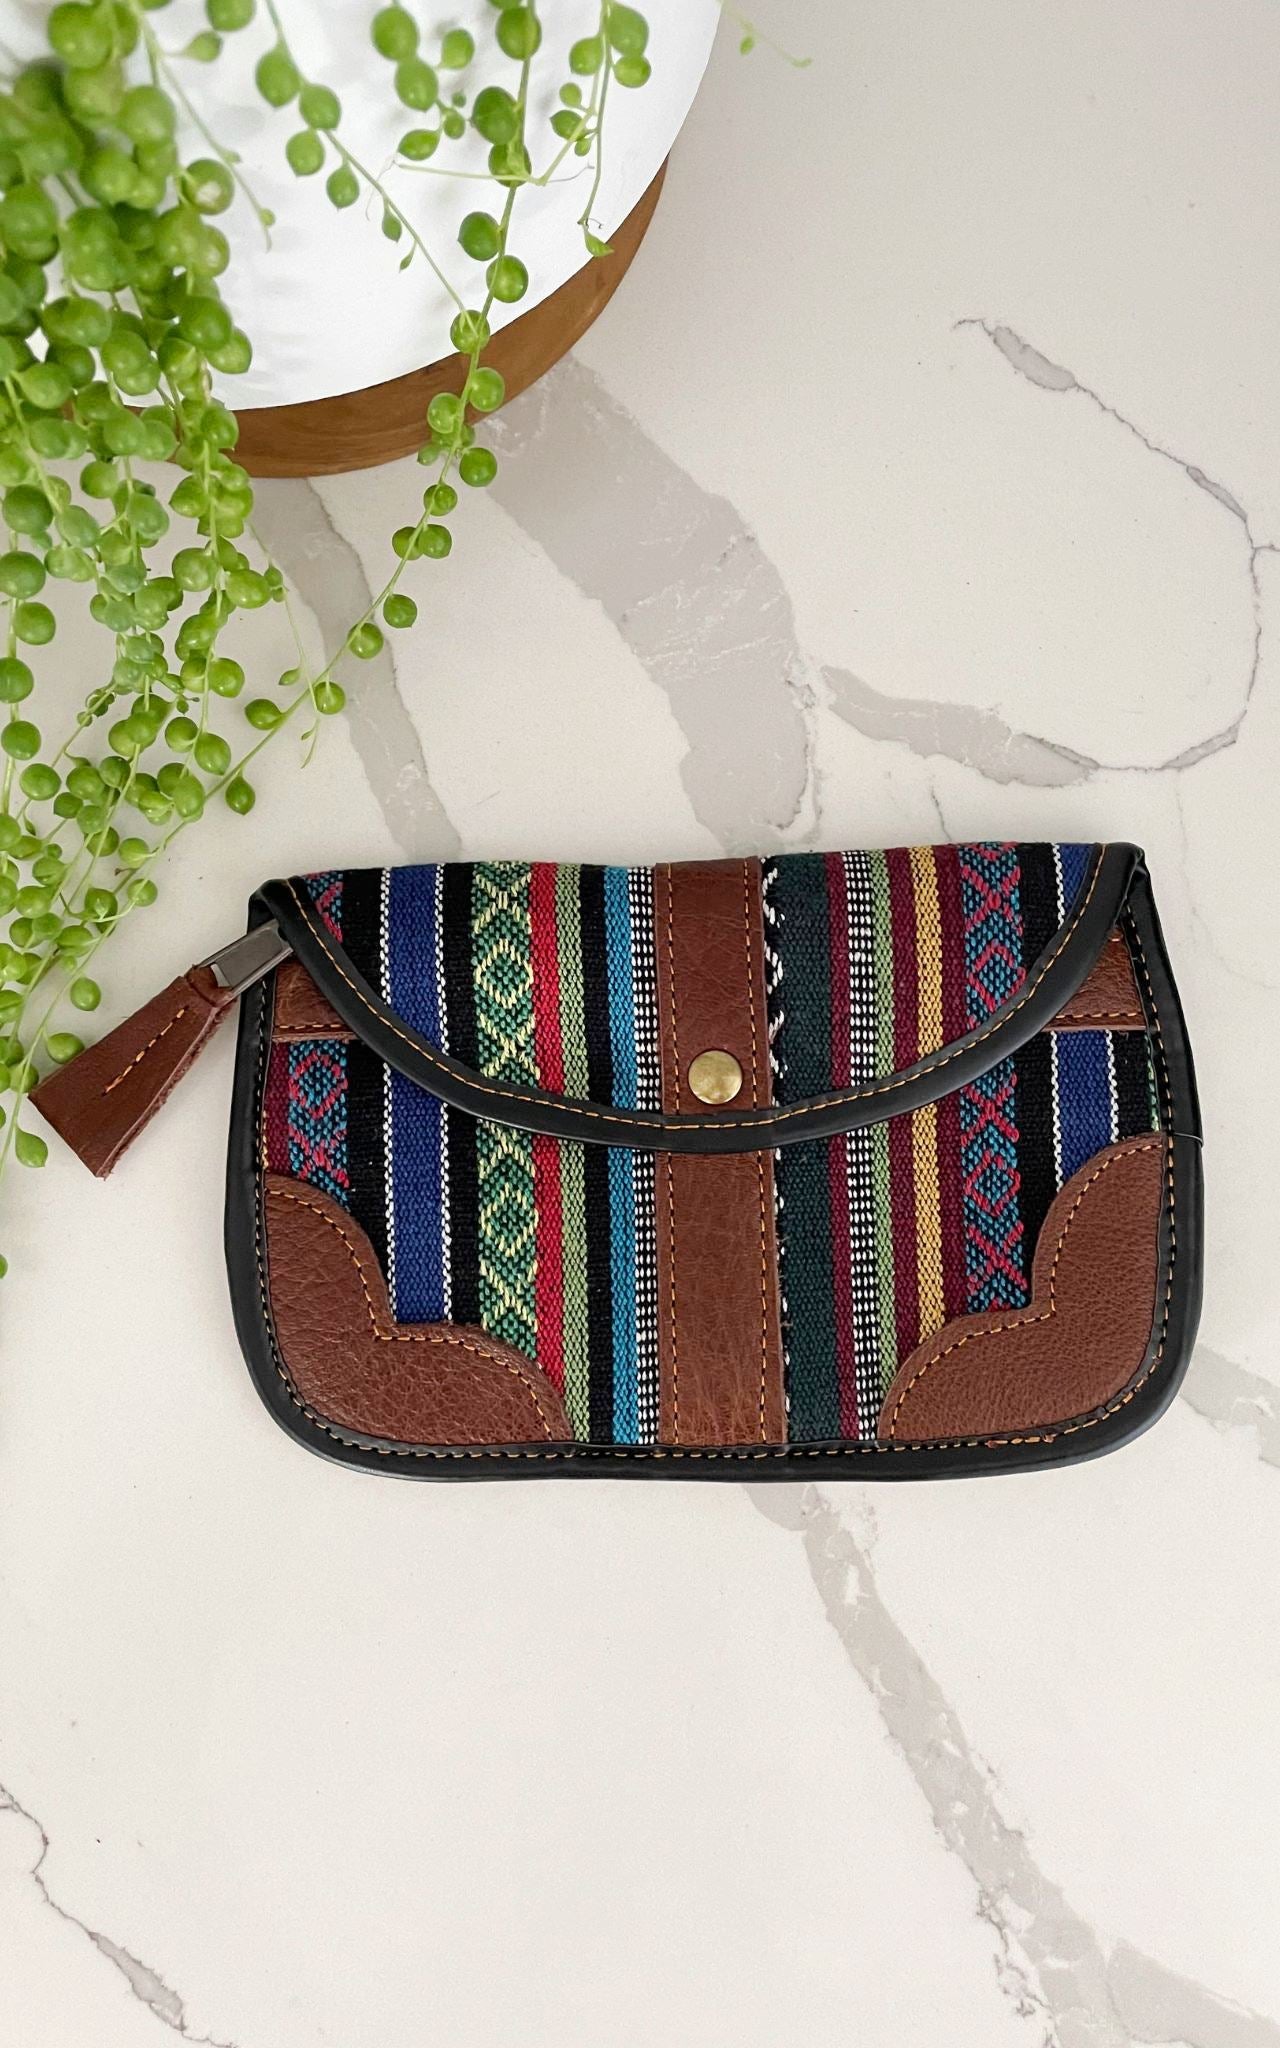 Surya Australia Ethical Buffalo Leather + Woven Cotton Clutch Wallets from Nepal - Arruna